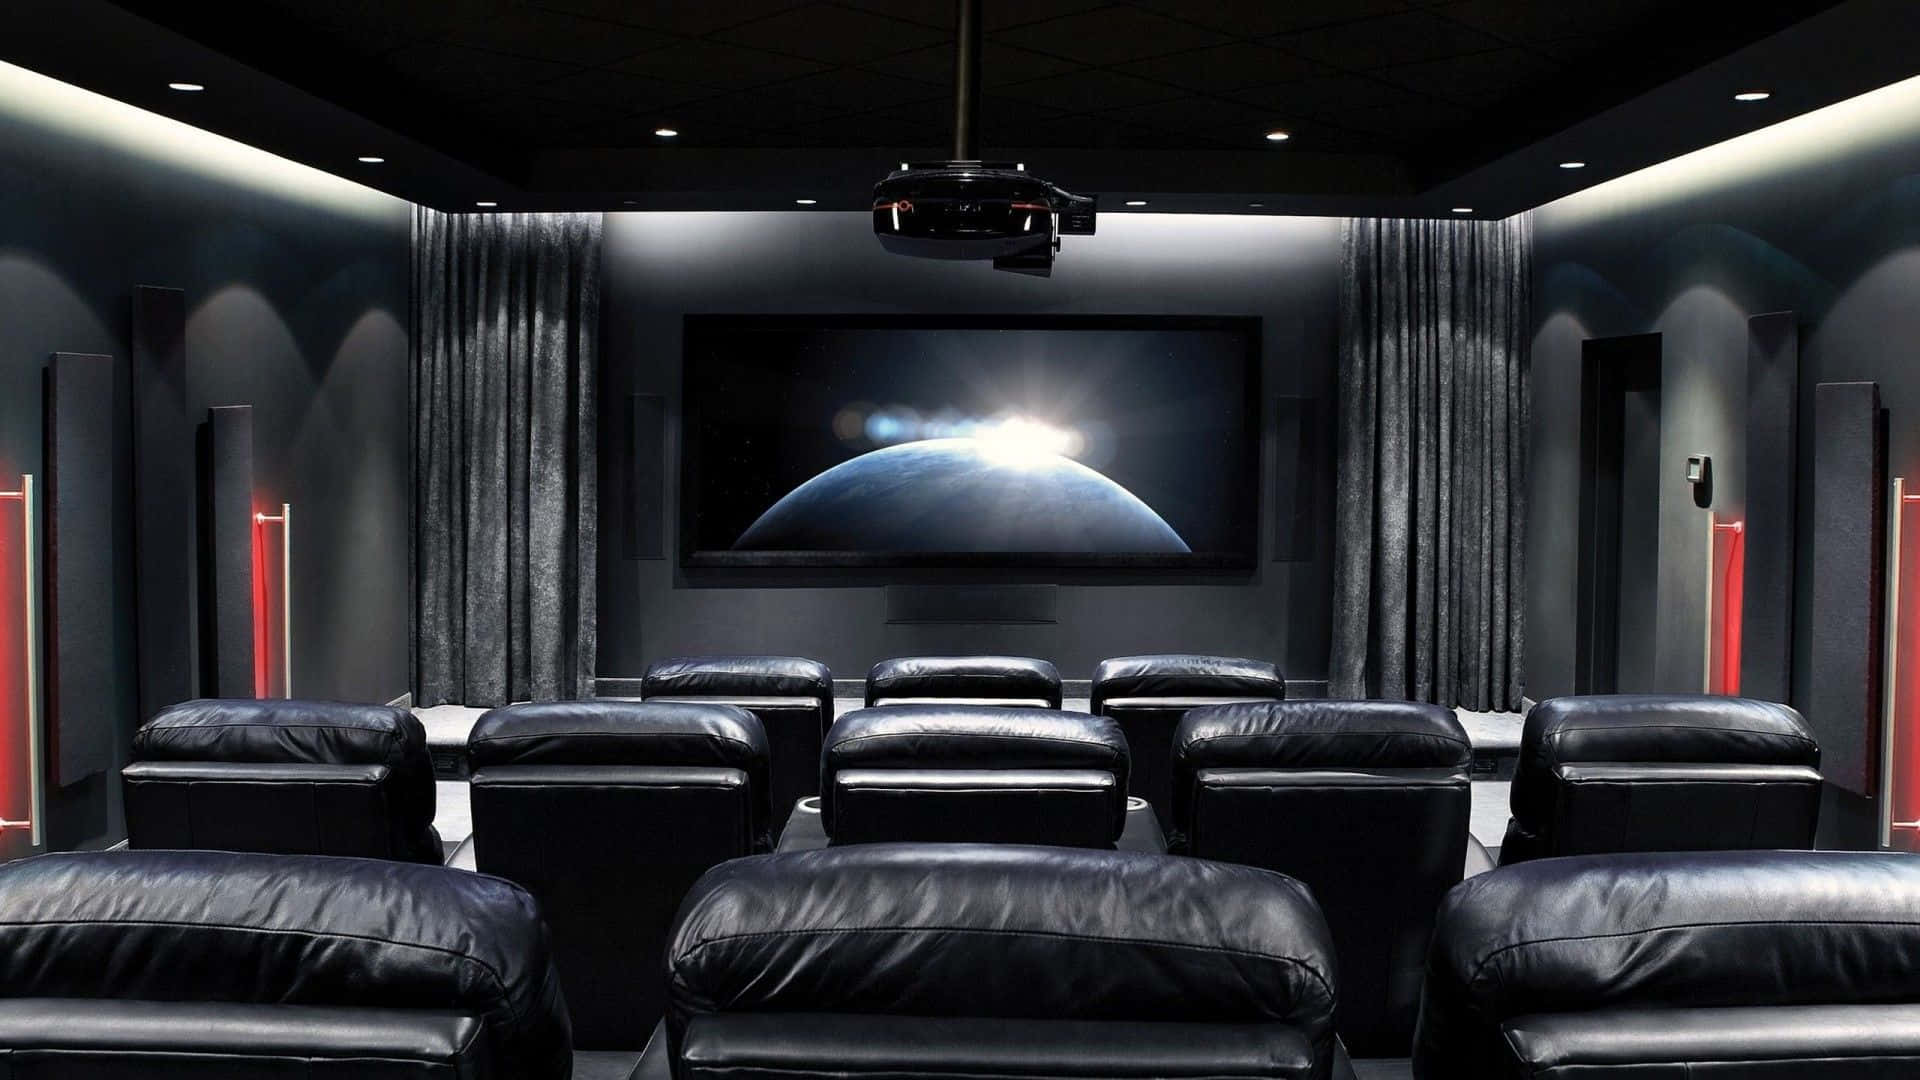 Enjoy your favorite movies in comfort with your own personalized Home Cinema! Wallpaper